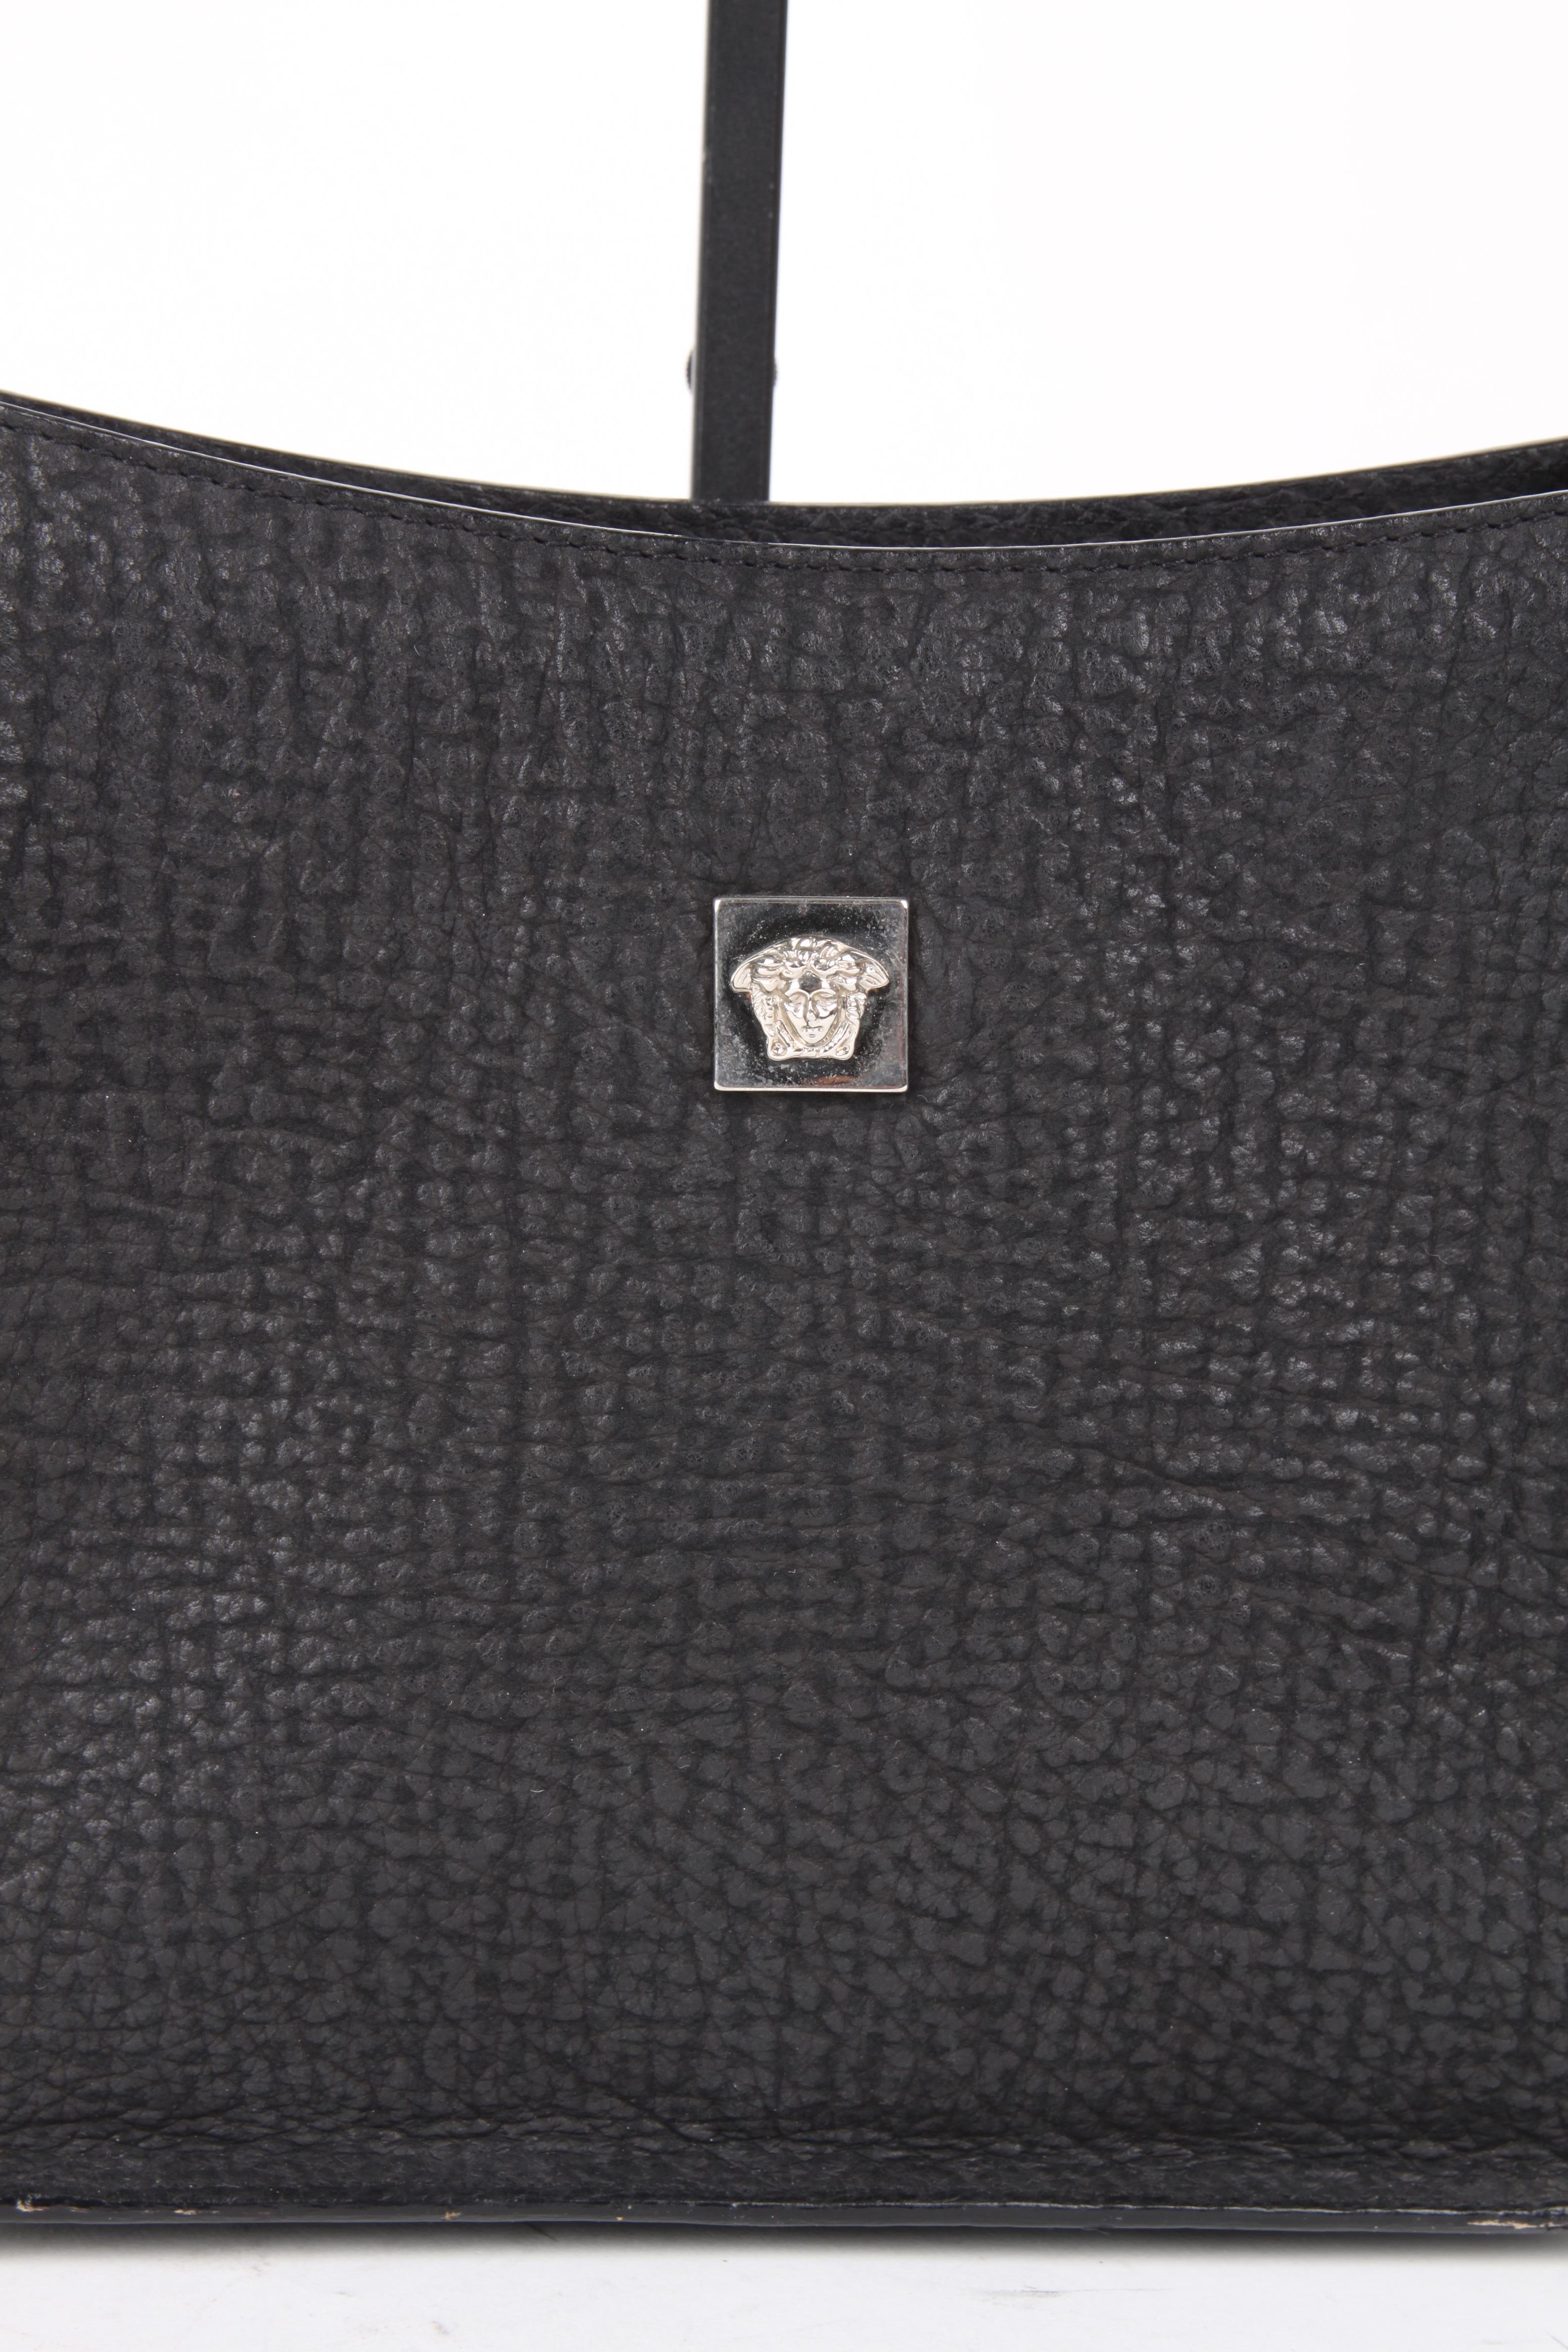 Gianni Versace Black Silver Leather Shoulder Bag.

This little bag makes a big statement. It features leather exterior with a matching black leather handle. The bag features a black suede lining, hook closure, one main compartment and one side